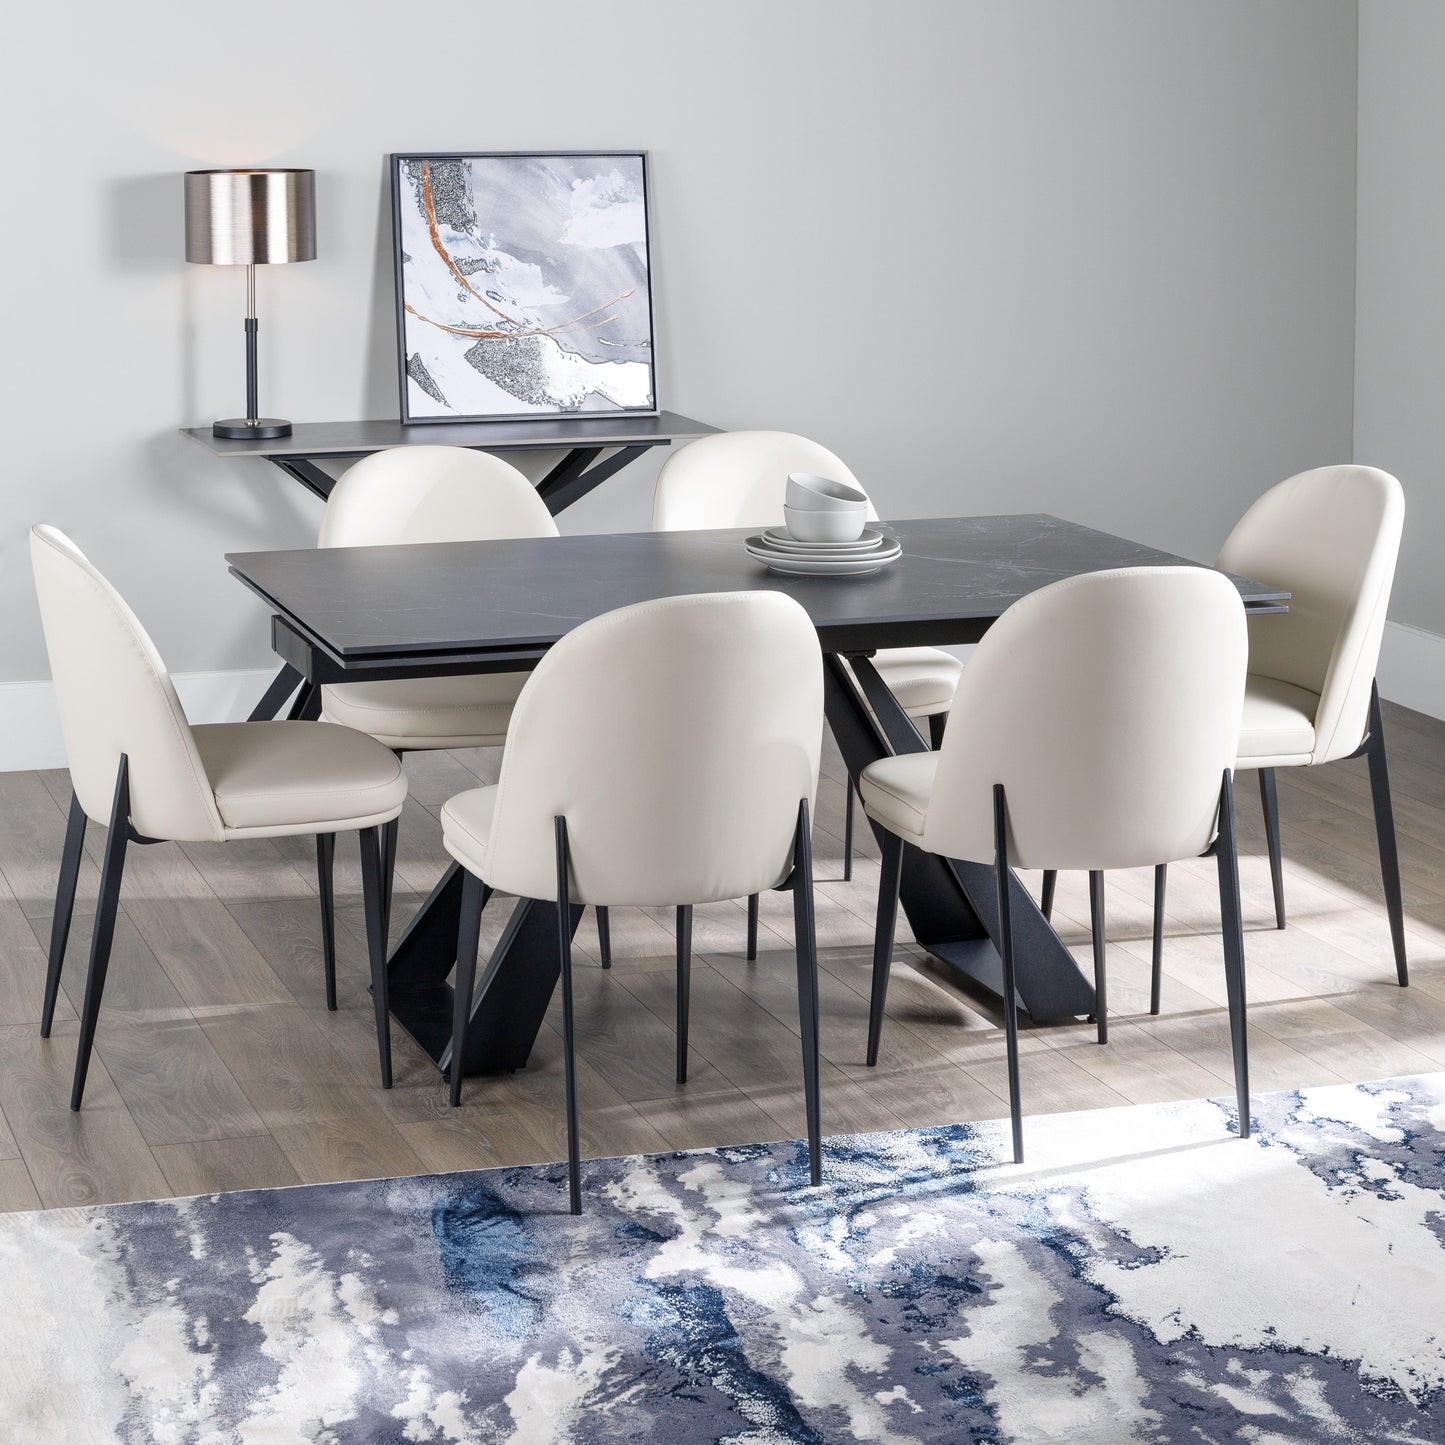 Furniture  -  Vortex Marble Dining Table Set with 6 Chairs  -  60003719